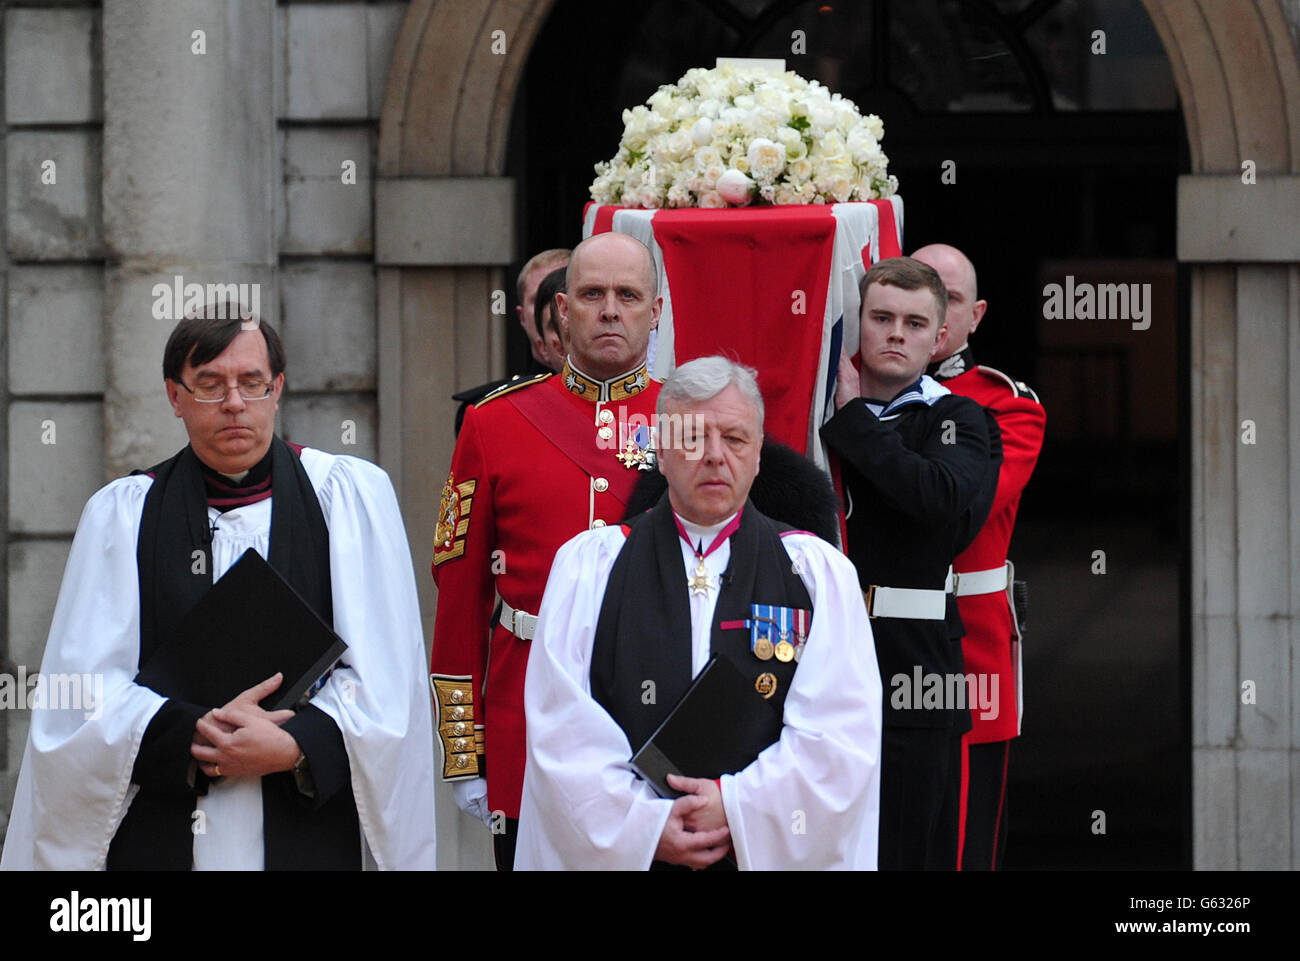 The Bearer Party made up of personnel from the three branches of the military transfer the coffin of former Prime Minister Margaret Thatcher onto a gun carriage to be drawn by the King's Troop Royal Horse Artillery from the Church of St Clement Danes to her funeral service, at St Paul's Cathedral, central London. Stock Photo